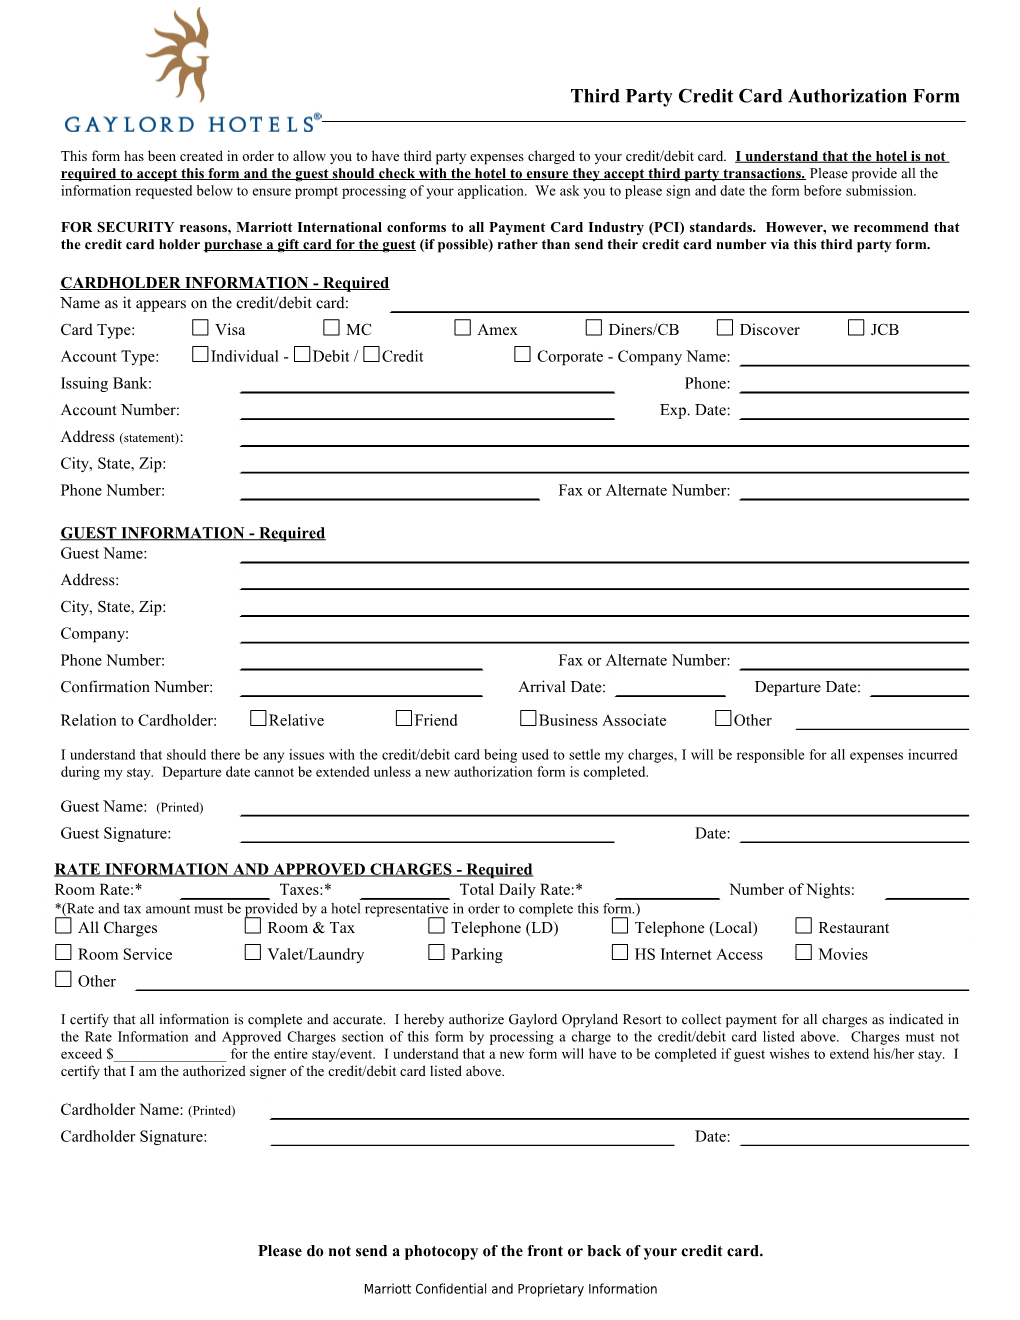 GH Third Party Credit Card Authorization Form